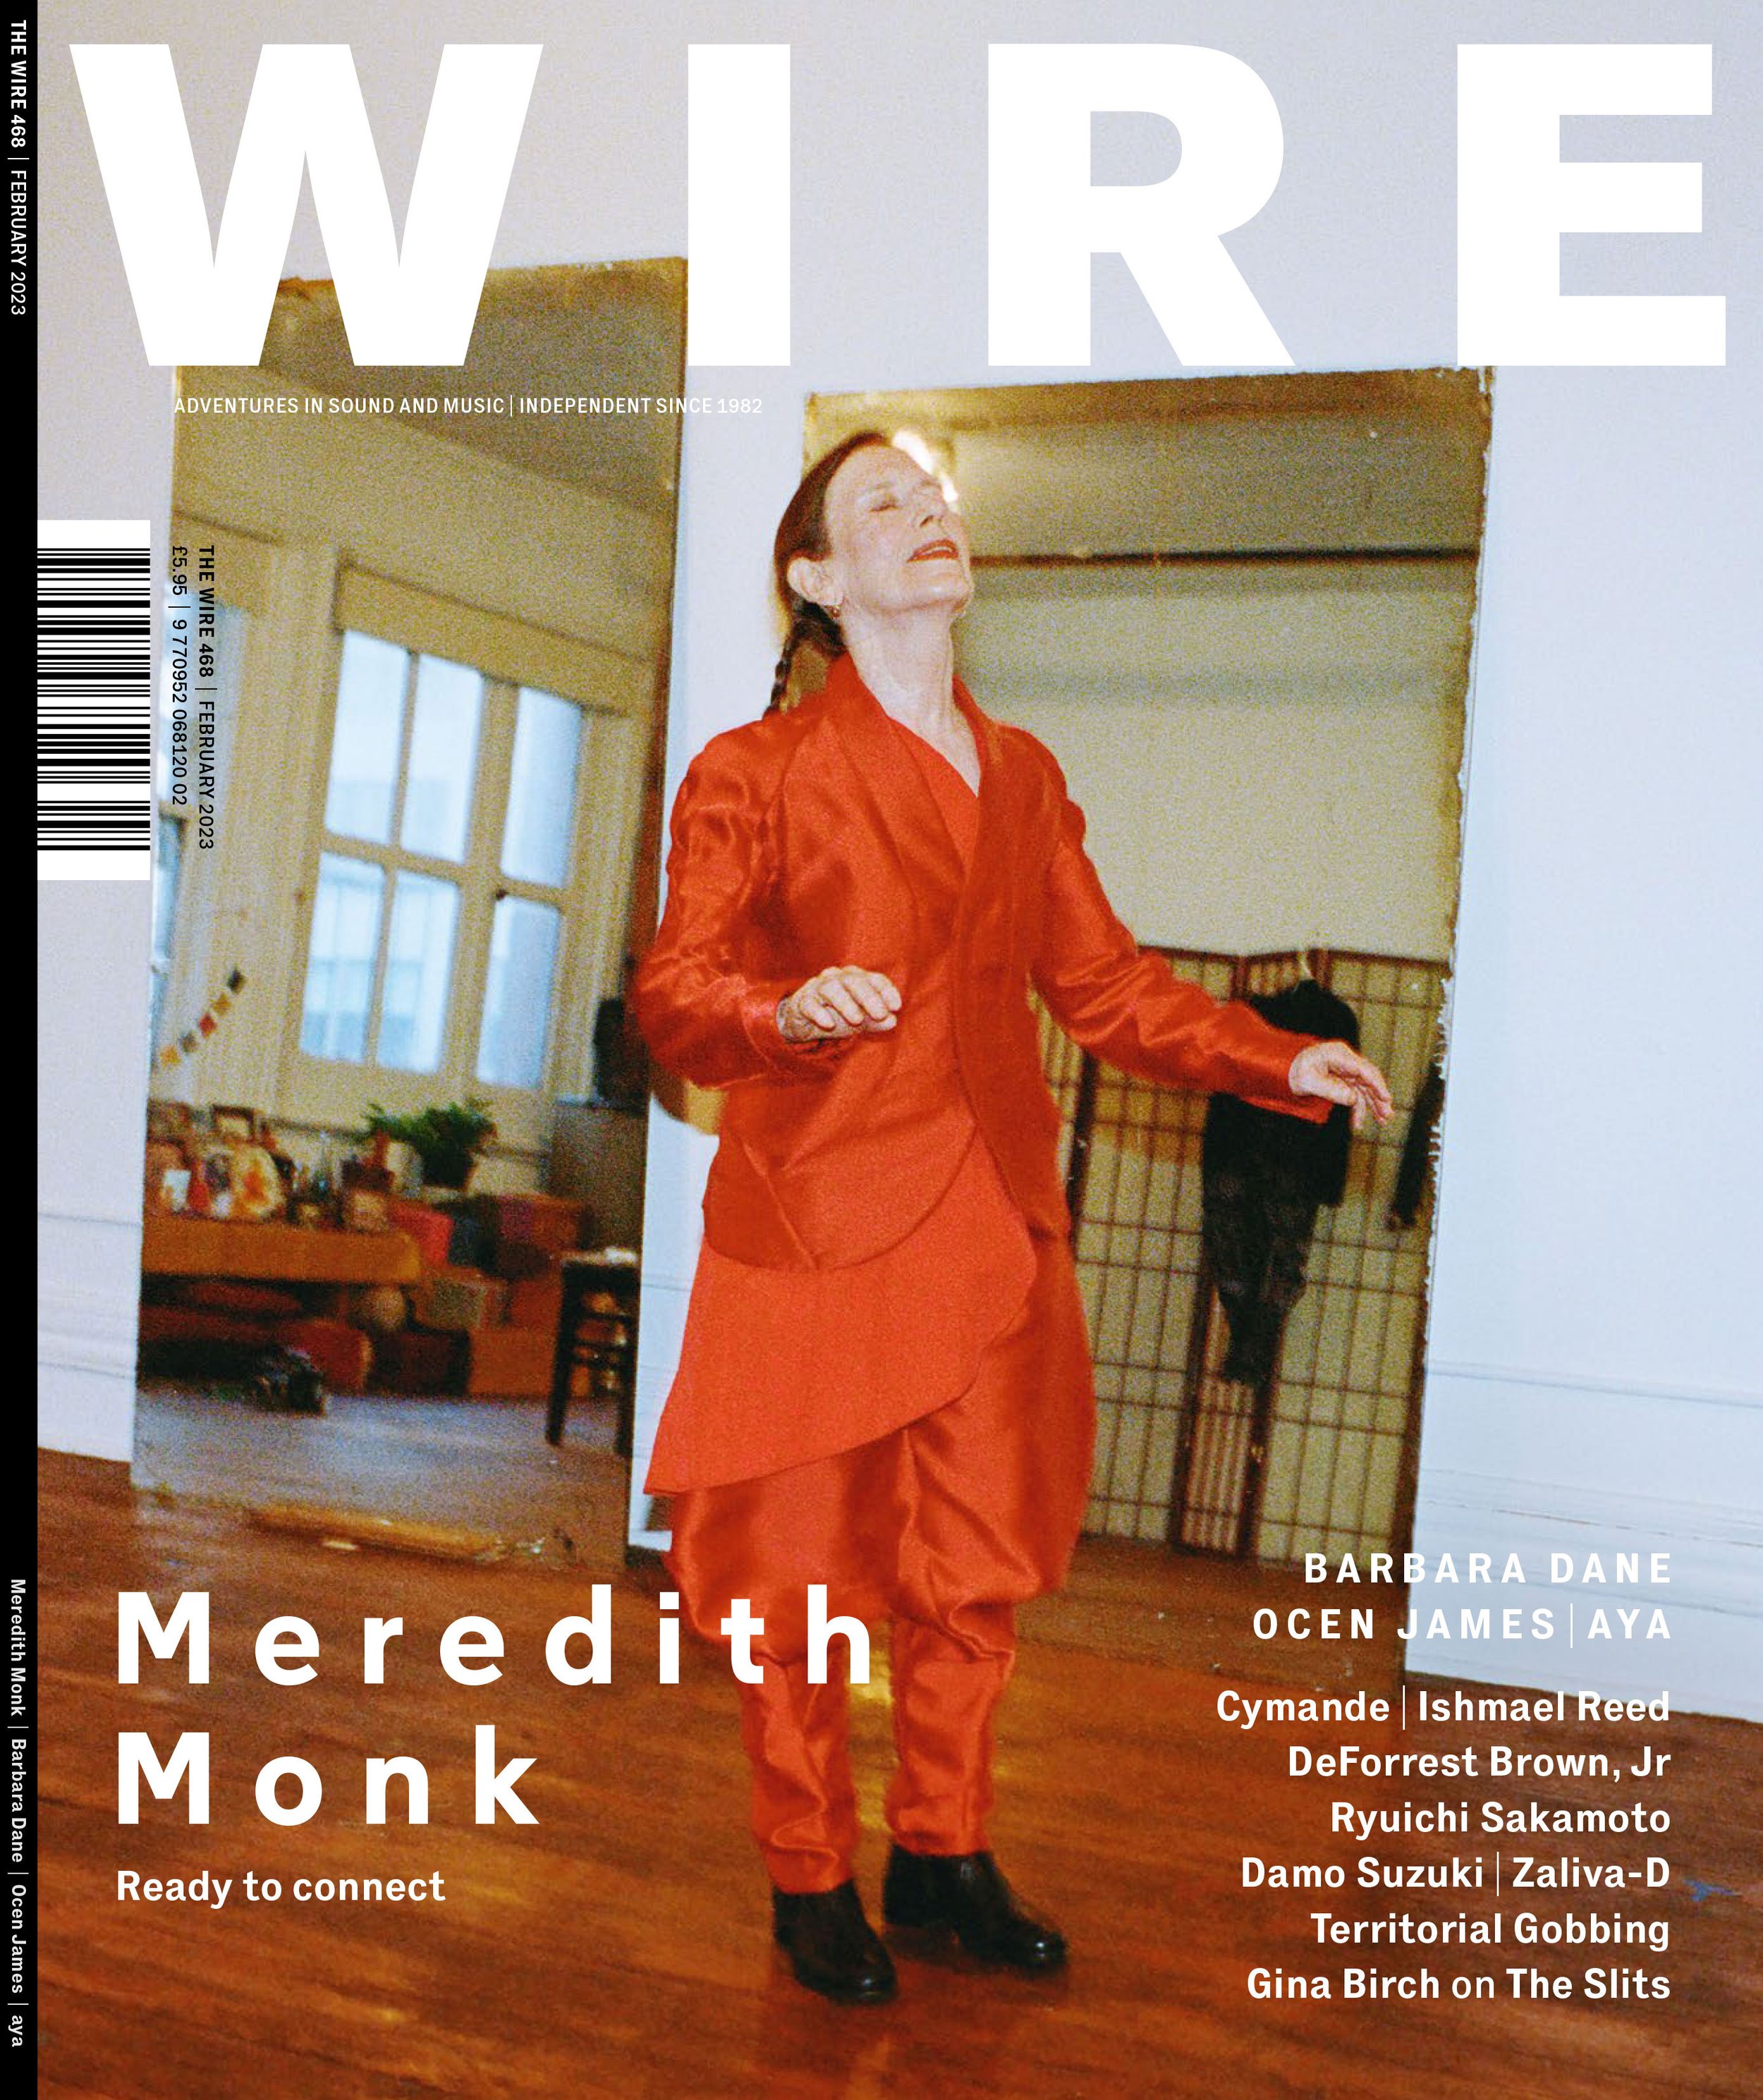 amber_byrne_mahoney_meredith_monk_the_wire_cover_468.jpg